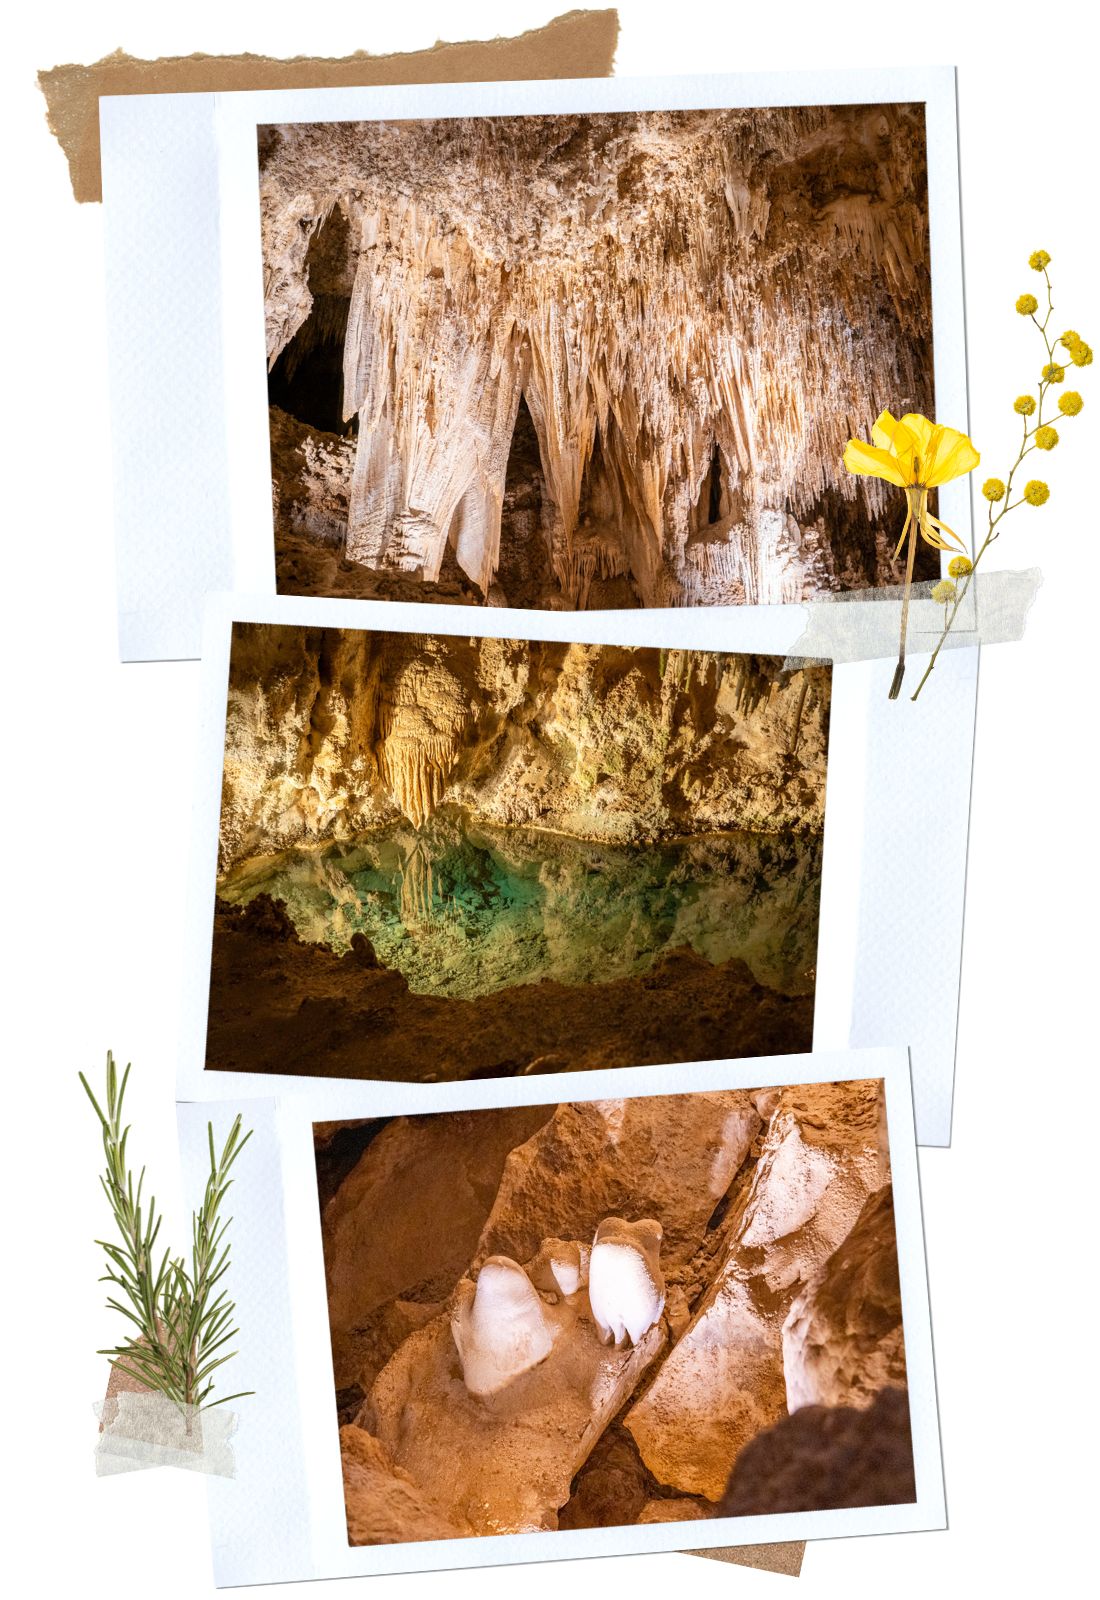 Carlsbad Caverns King's Palace Tour - The Adventure 4